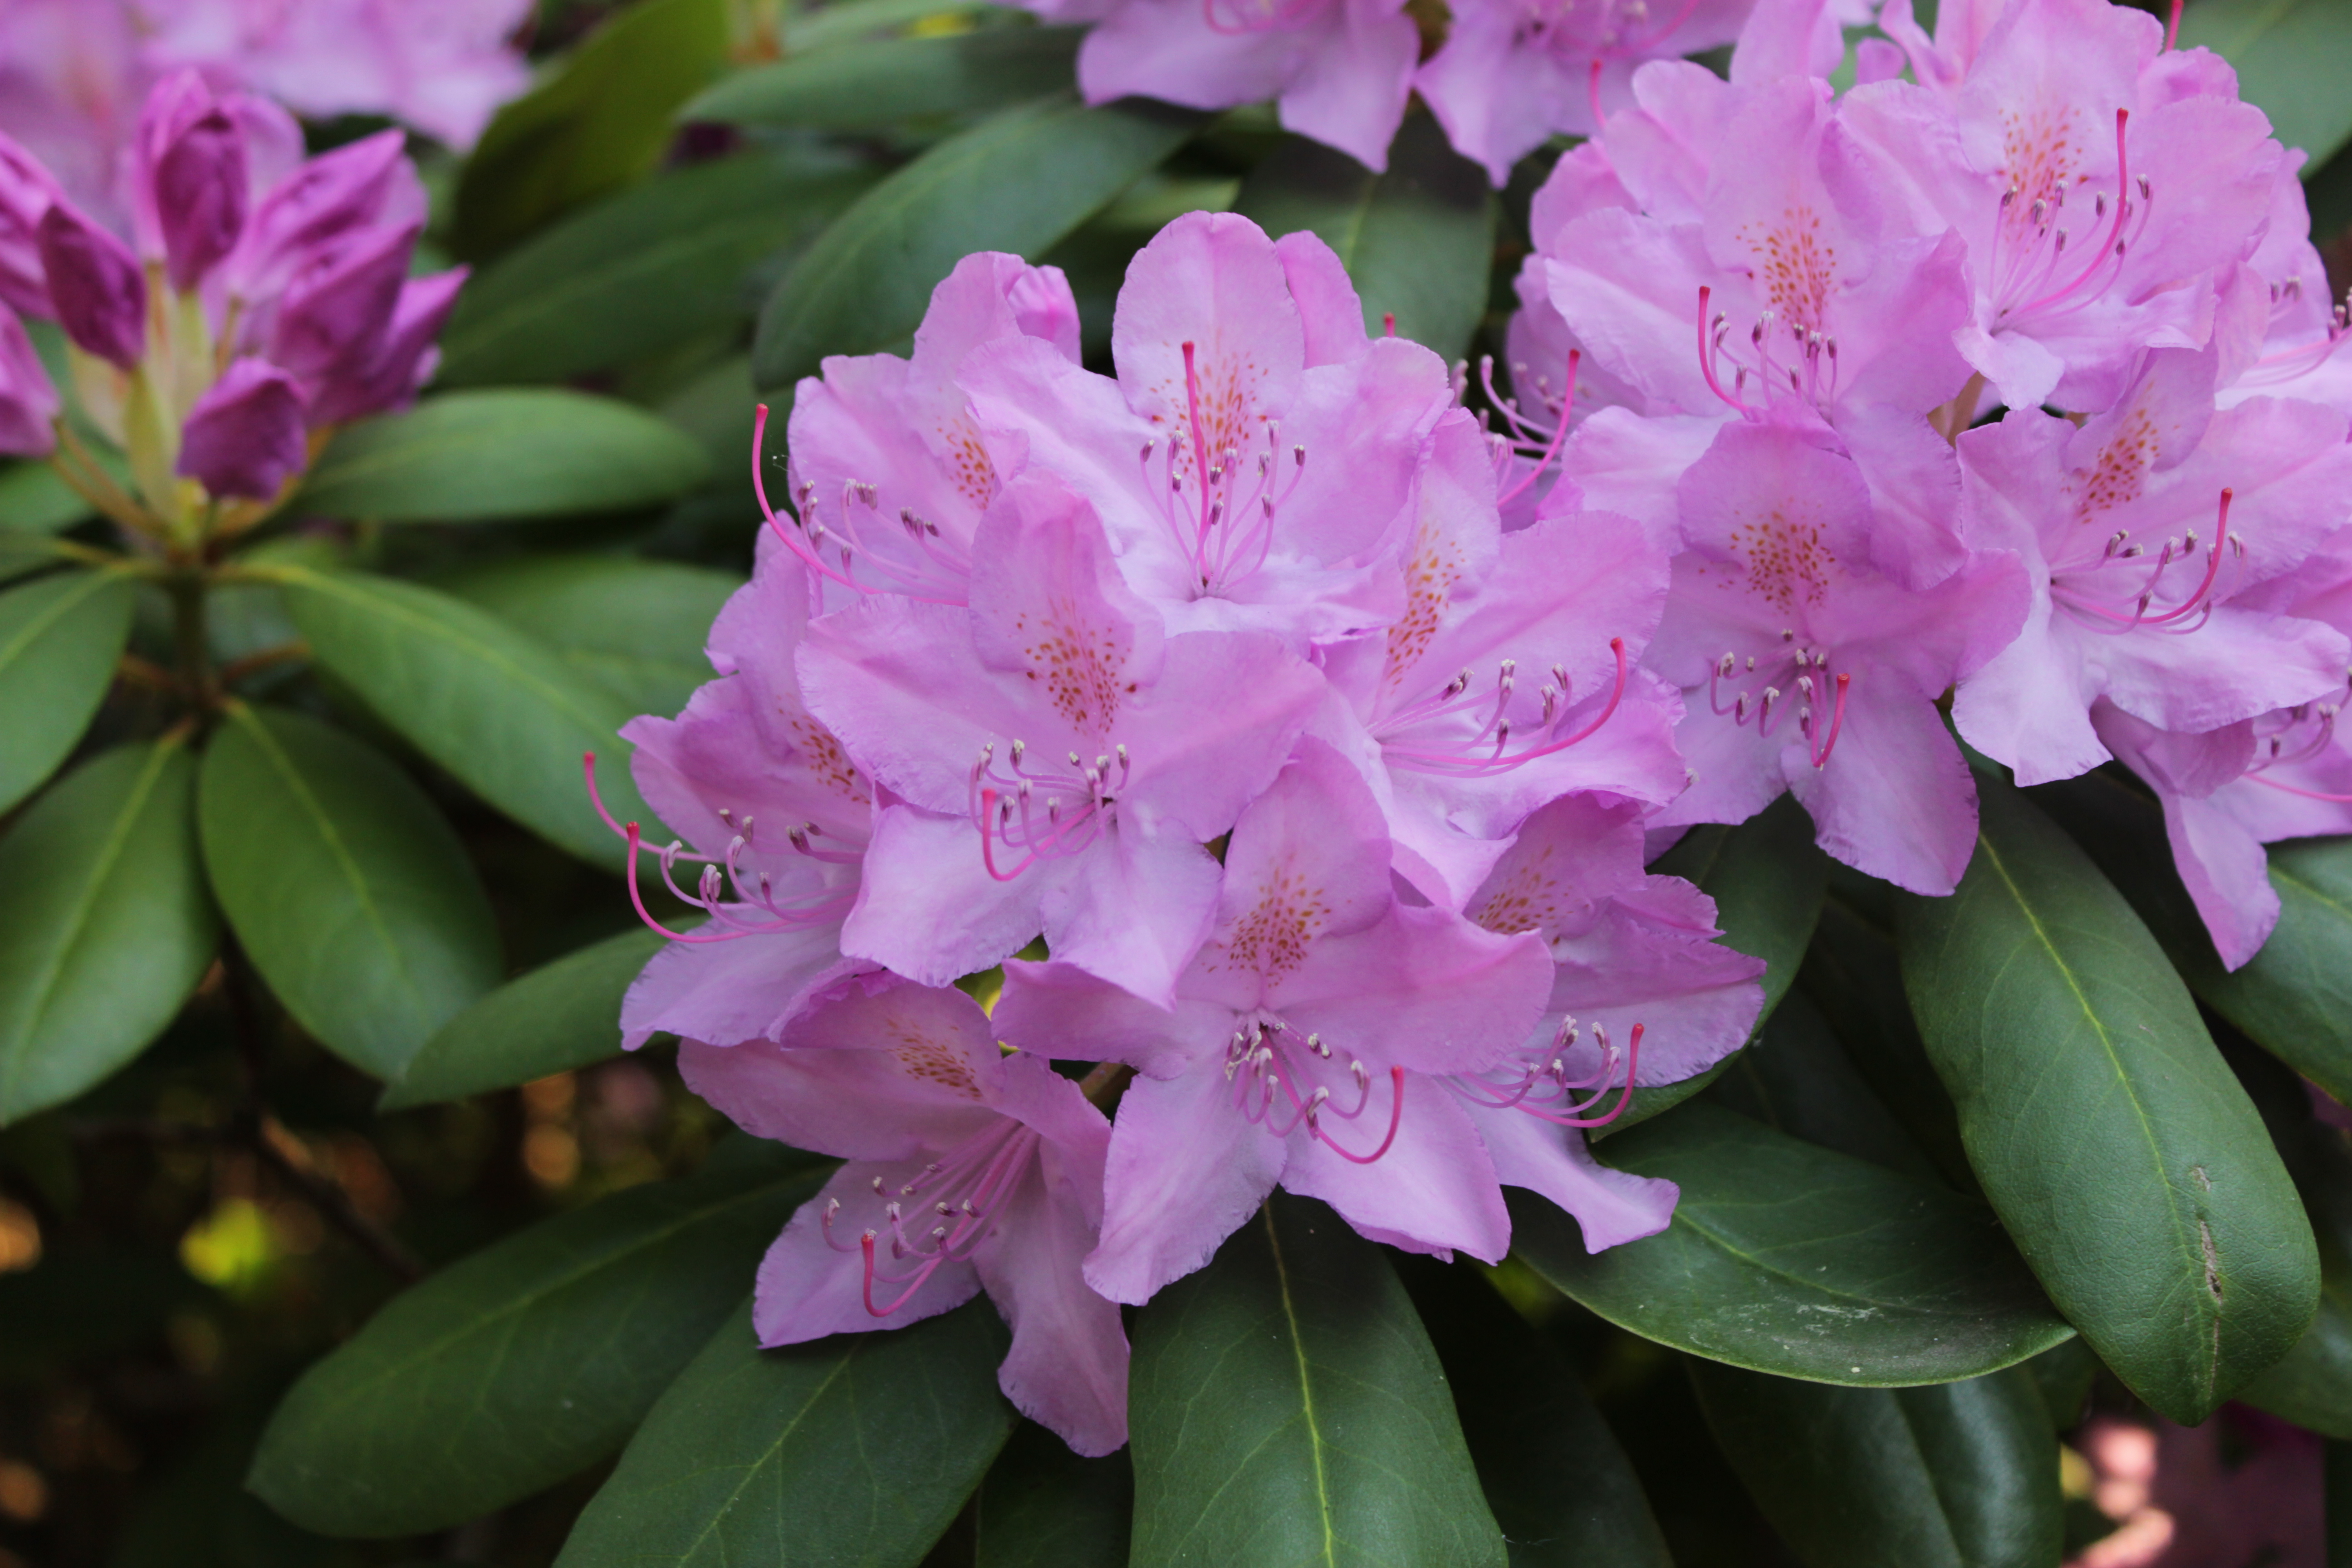 Rhododendron Backgrounds, Compatible - PC, Mobile, Gadgets| 5184x3456 px